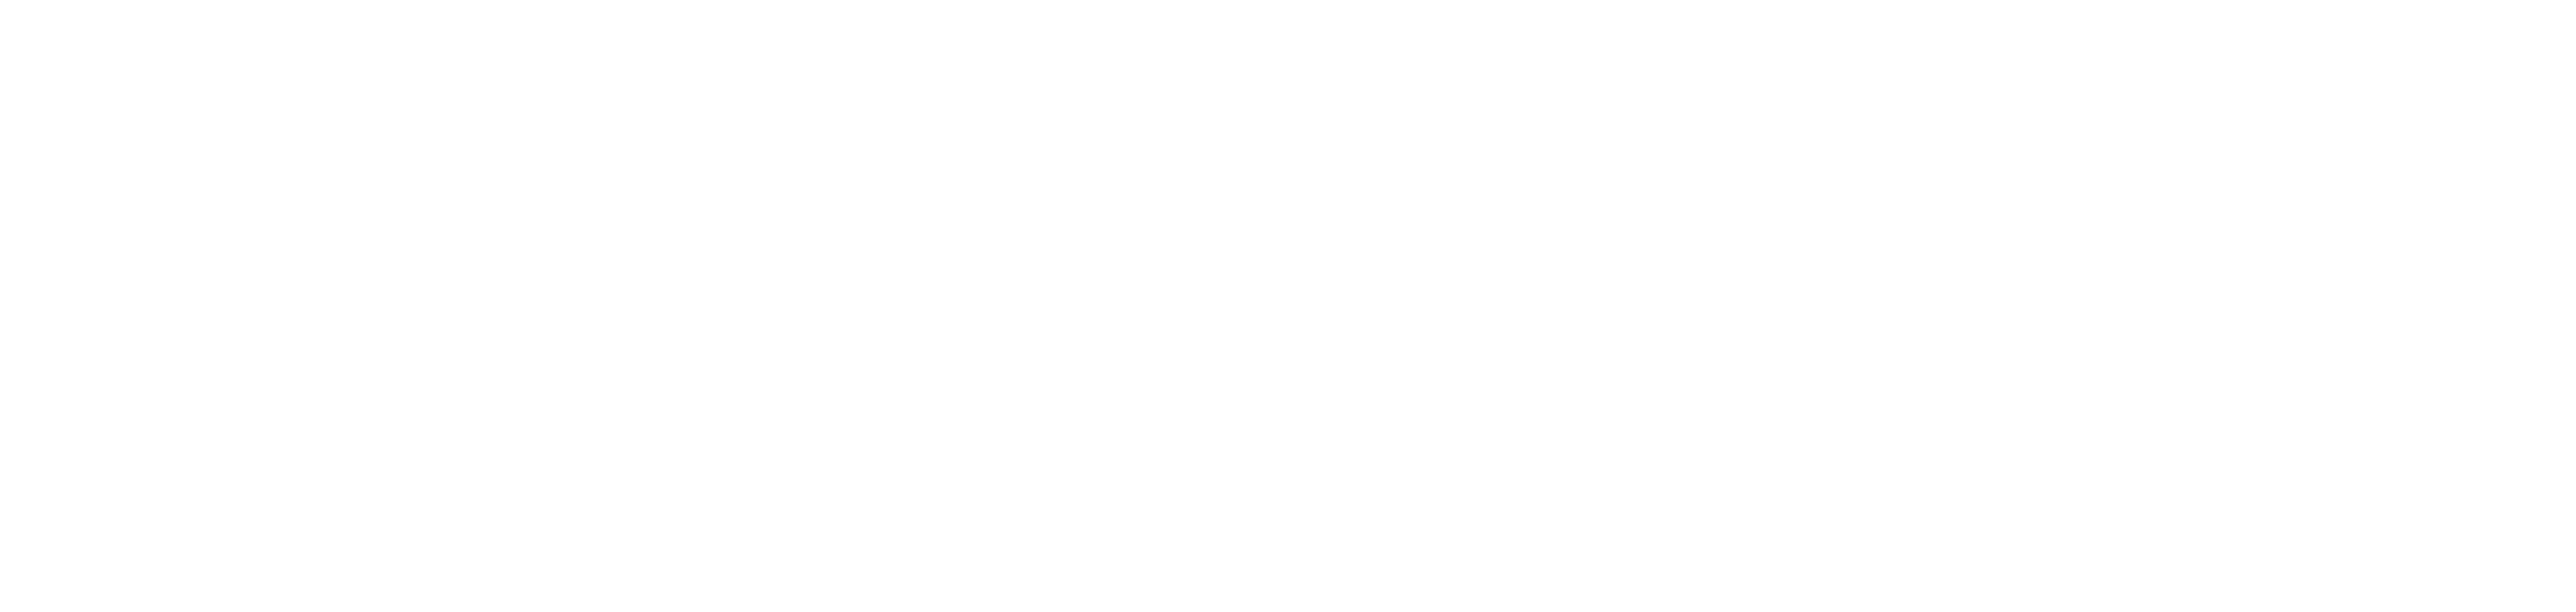 EN-Funded-by-the-European-Union_WHITE